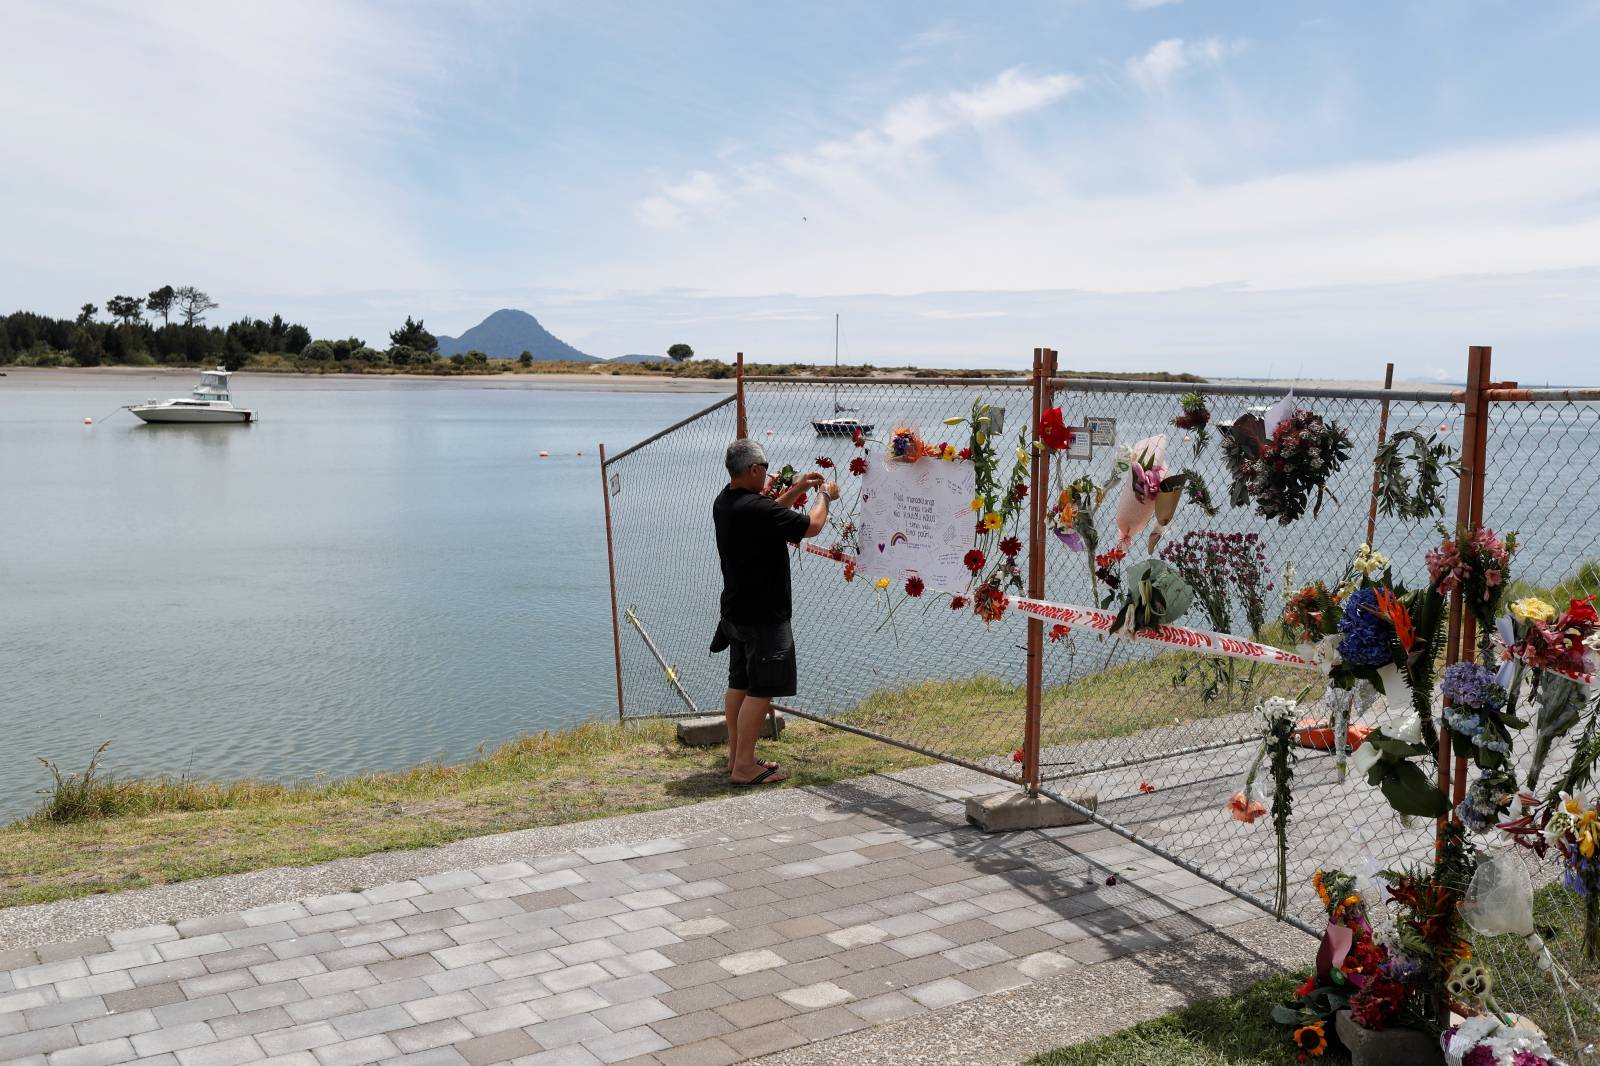 A man contributes to a memorial at the harbour in Whakatane, following the White Island volcano eruption in New Zealand